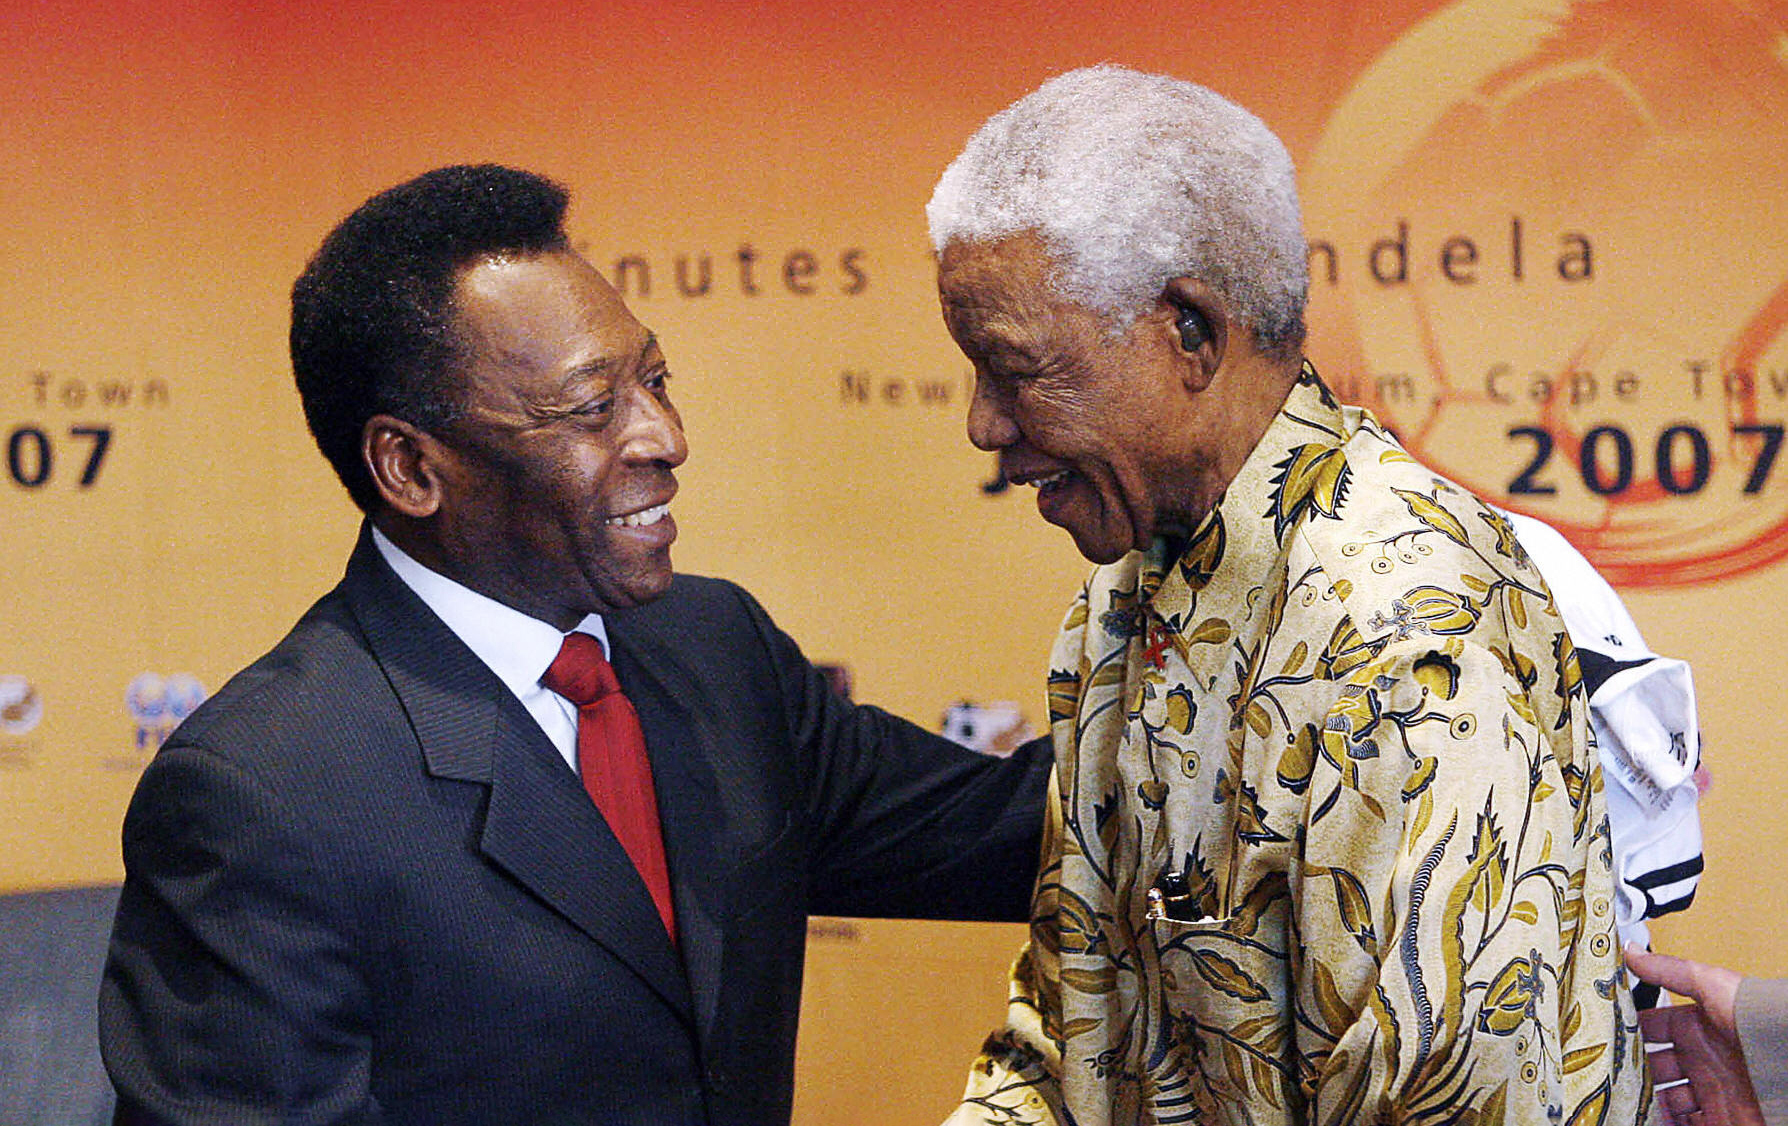 Brazilian football legend Pele (L) shakes hands with former South African President, Nelson Mandela, in Johannesburg, South Africa, on July 17, 2007. Pele is in South Africa for the 